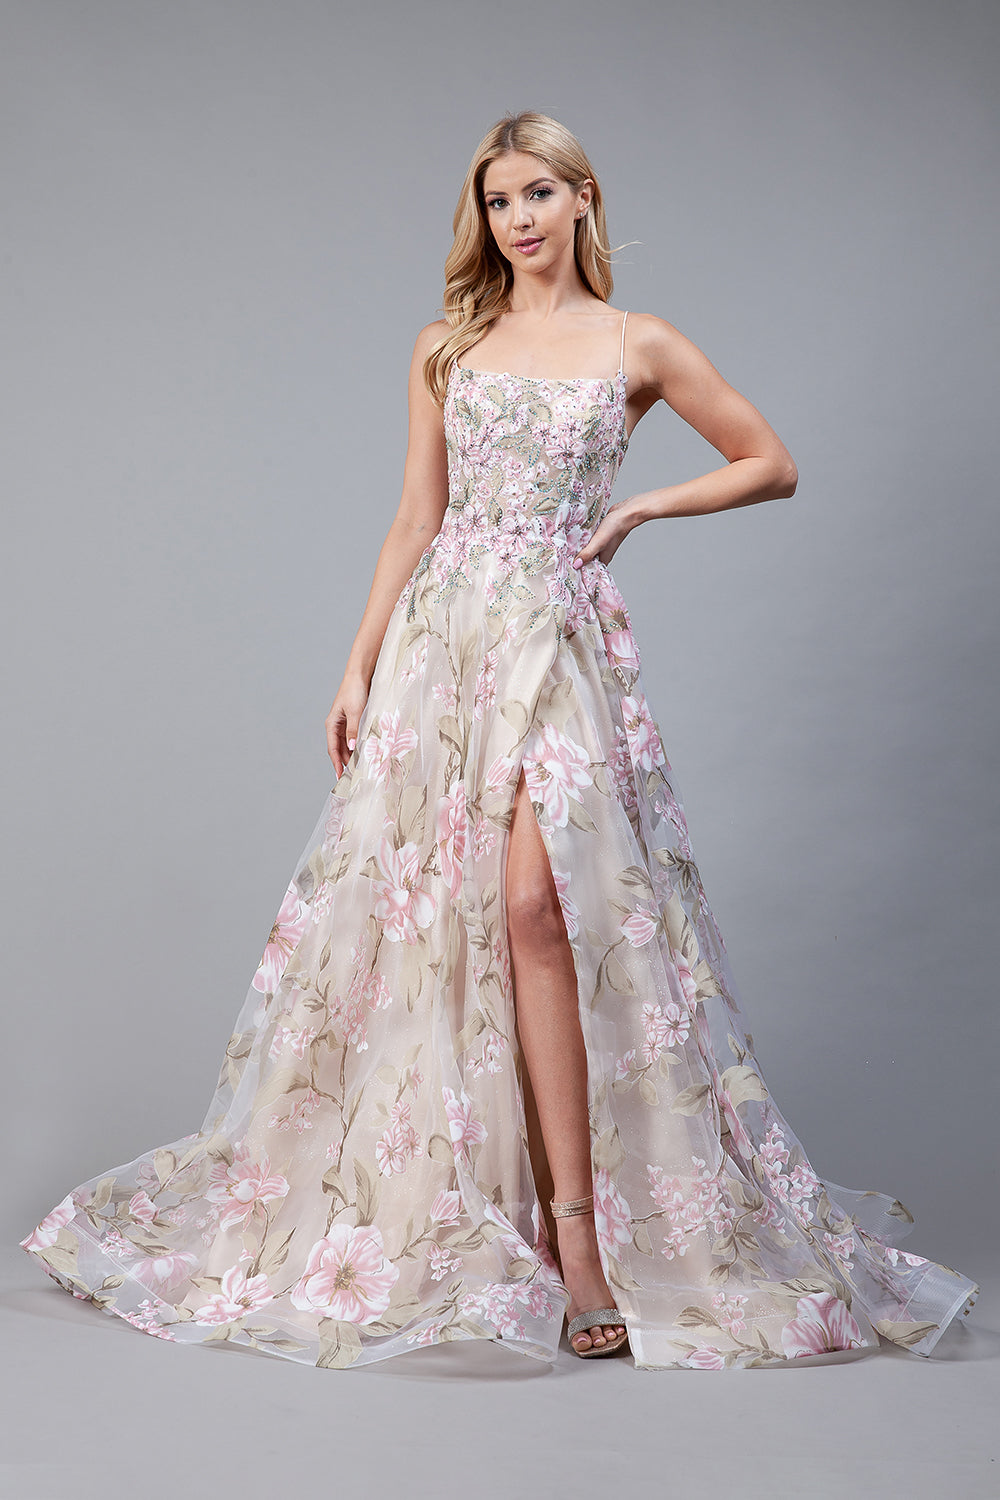 Embroidered Flowers Straight Across Side Slit Long Prom Dress AC2105 Sale Elsy Style Prom Dress